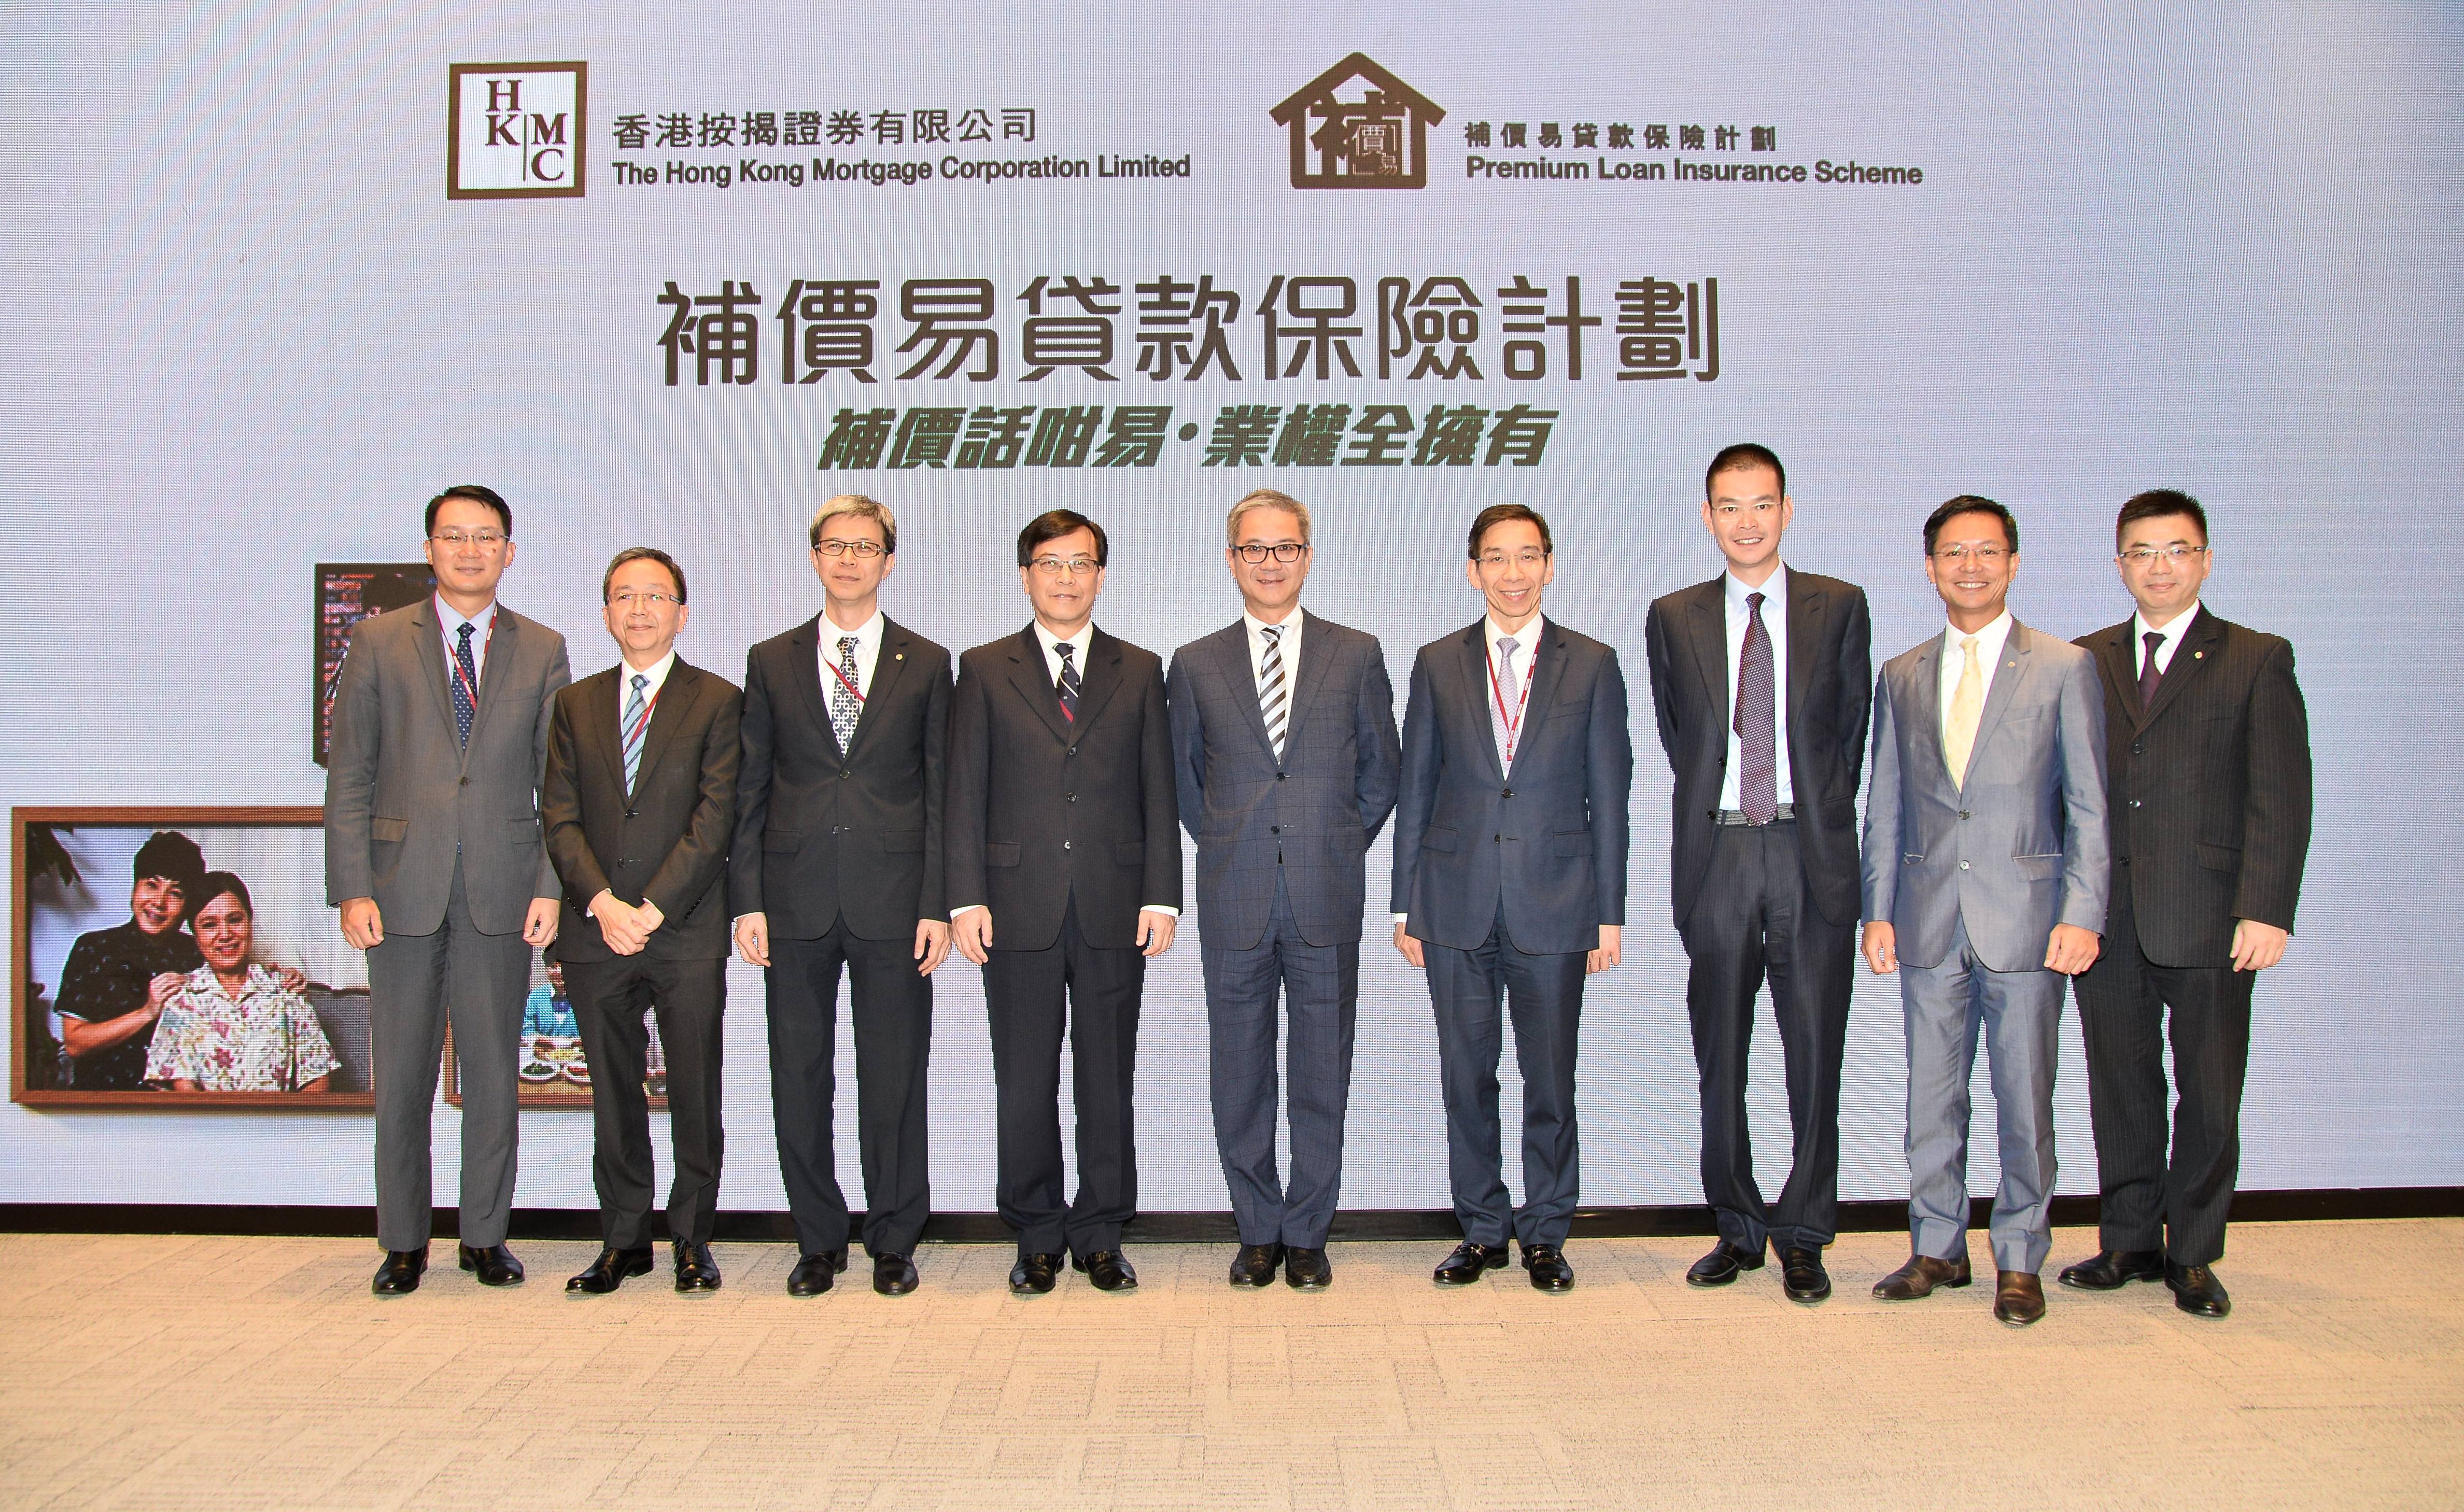 The Chief Executive Officer of the HKMC, Mr Raymond Li (centre), is pictured with the representatives of the PLIS’s eight participating banks.